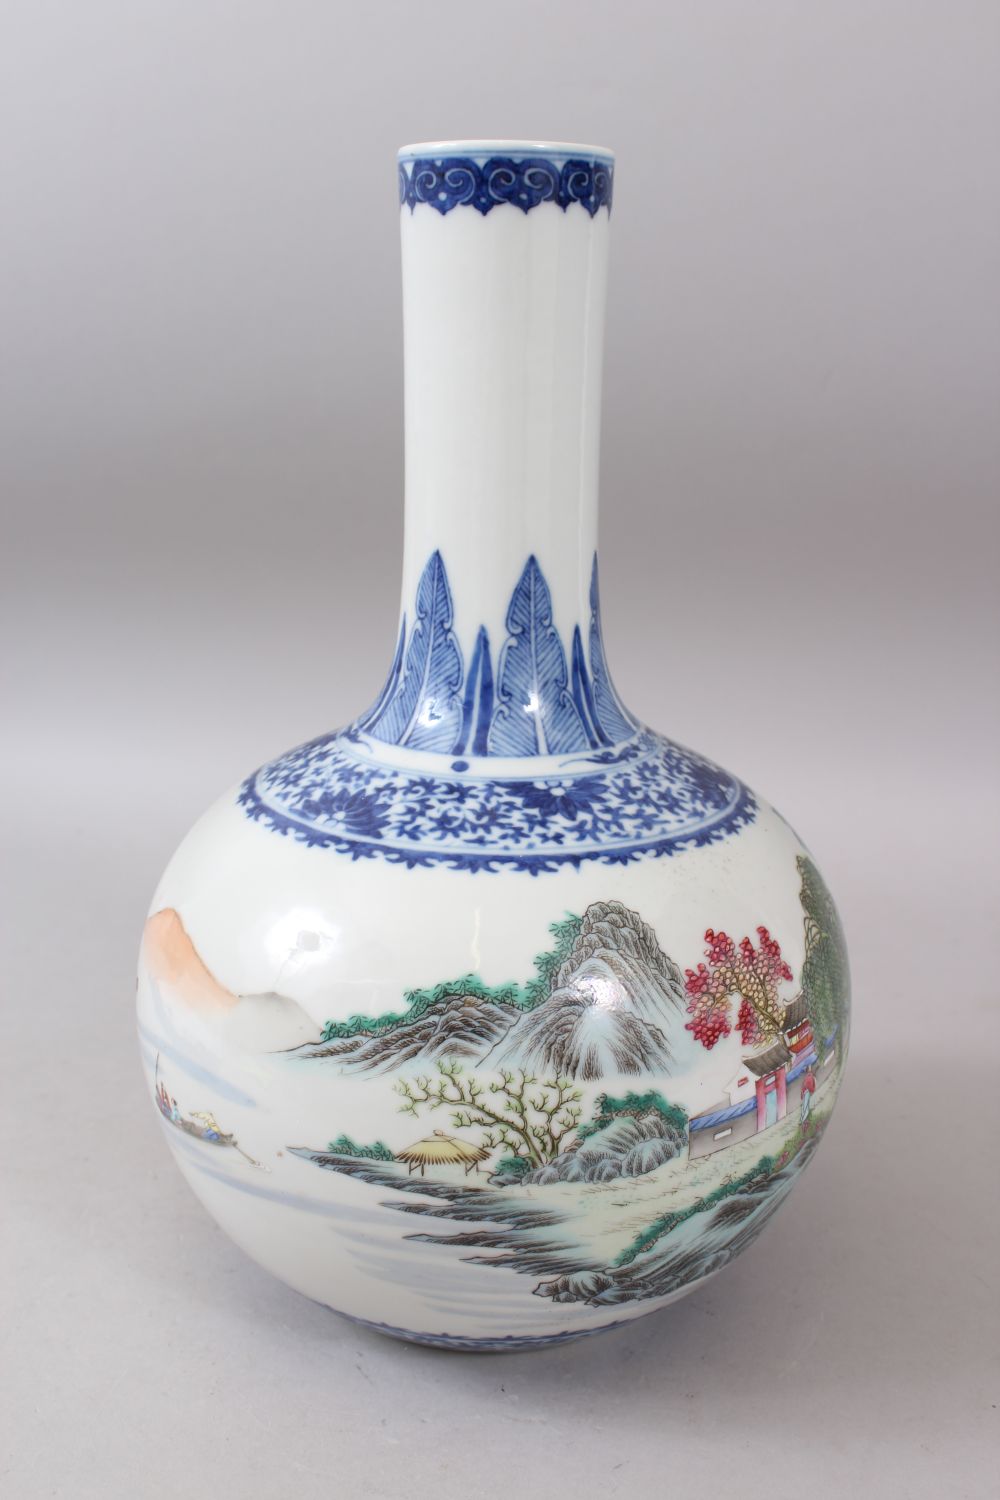 A LARGE 19TH-20TH CENTURY CHINESE BOTTLE VASE painted with a continuous scene of a lake view, - Image 2 of 12